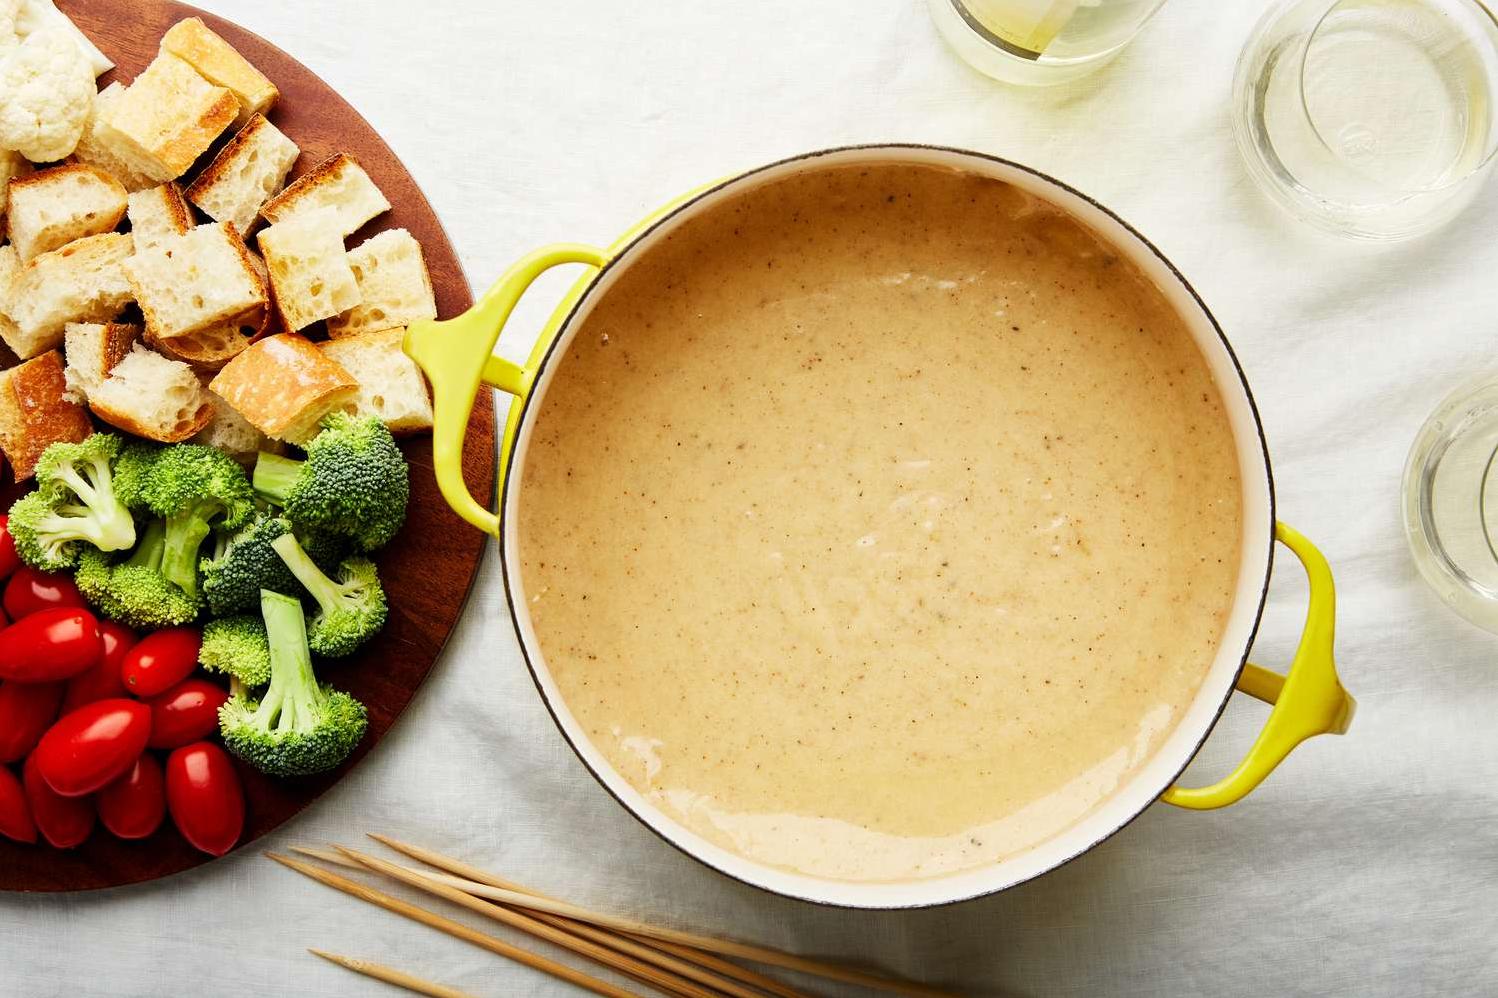  Savor every bite with this delicious fondue